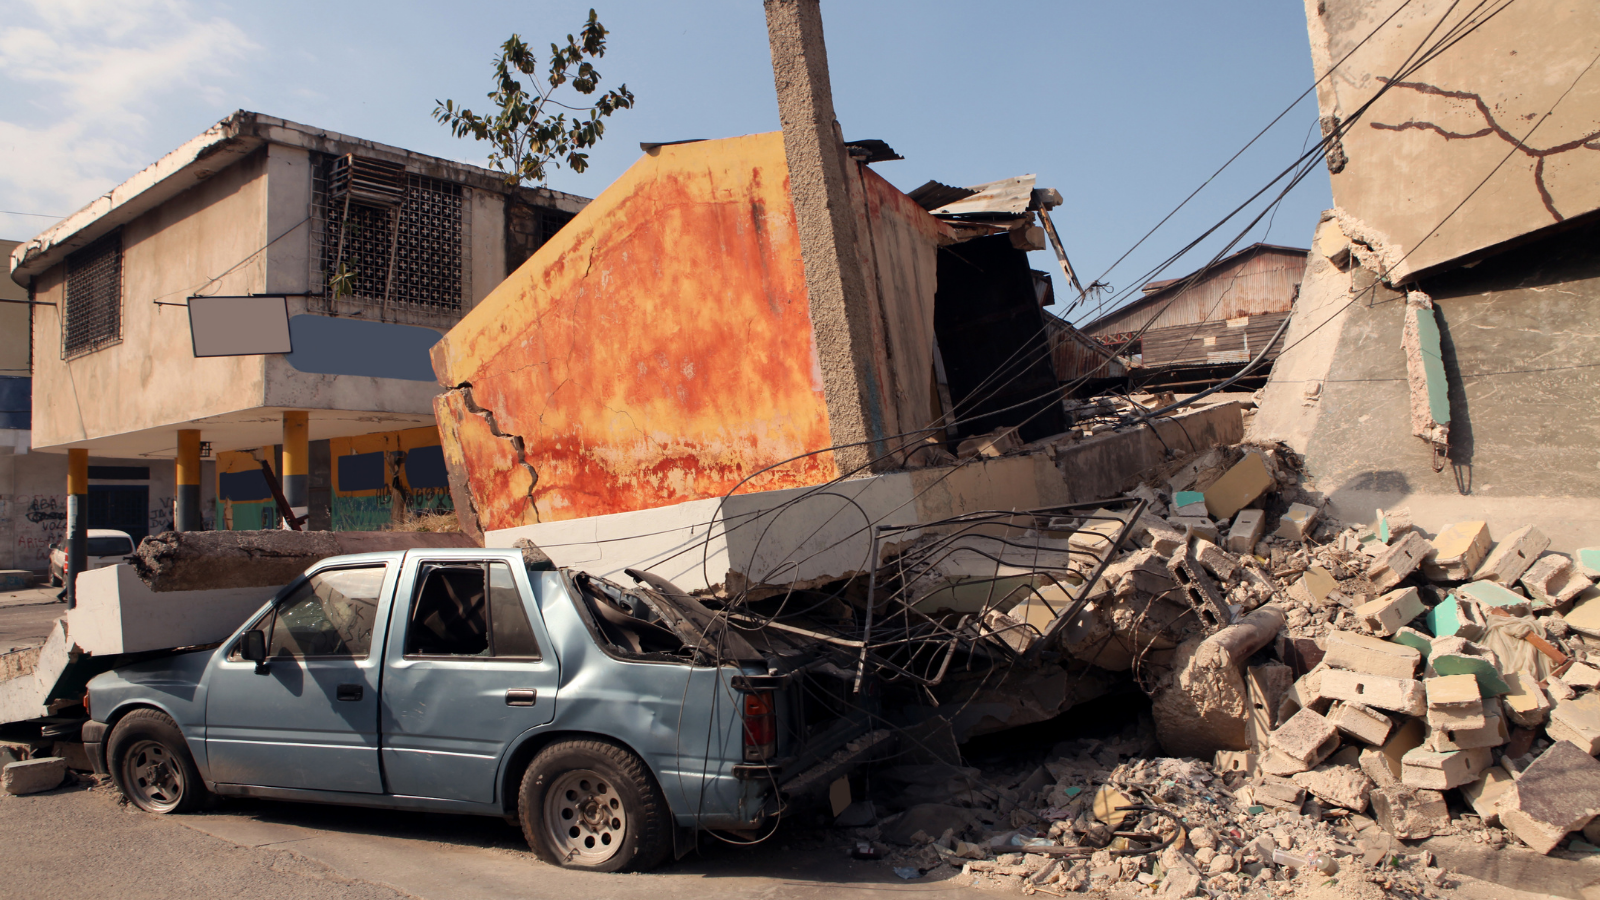 On 14 August 2021, a devastating 7.2 magnitude earthquake struck Haiti. It claimed more than 2,200 lives, destroyed more than 60,000 homes, and left some 650,000 people in need of humanitarian assistance.